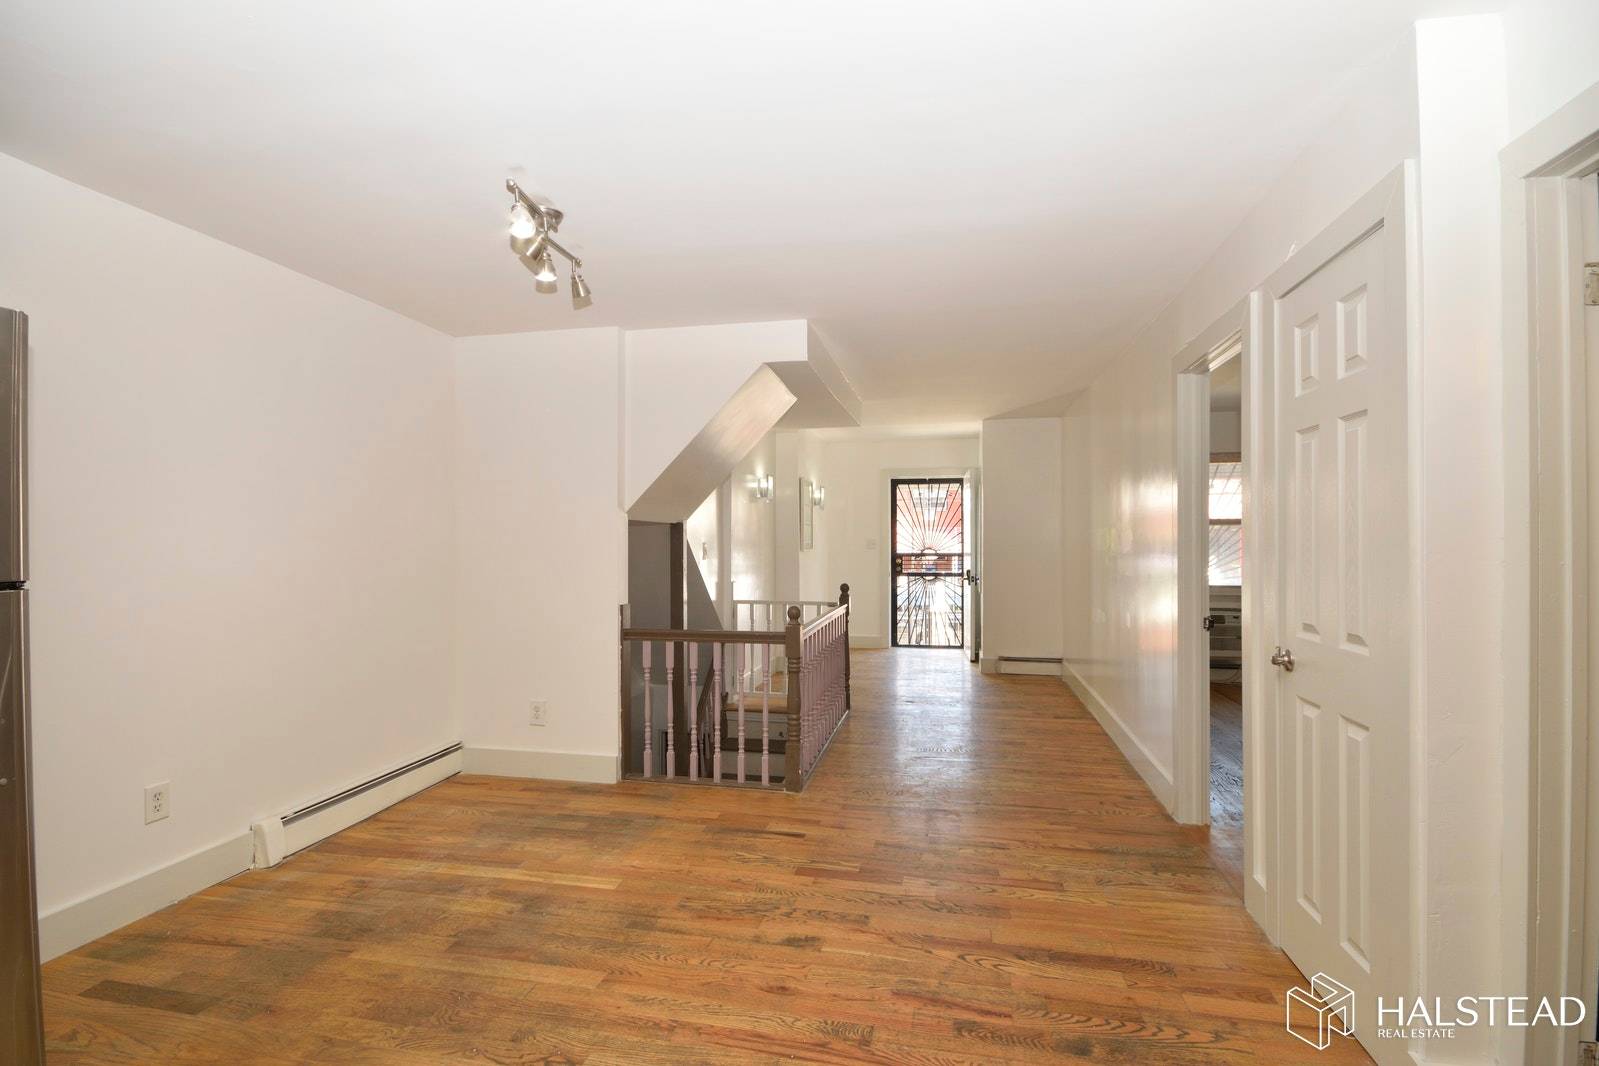 Enormous 3 Bedroom 2 Bathroom apartment with access to back yard available in the heart of Bushwick.